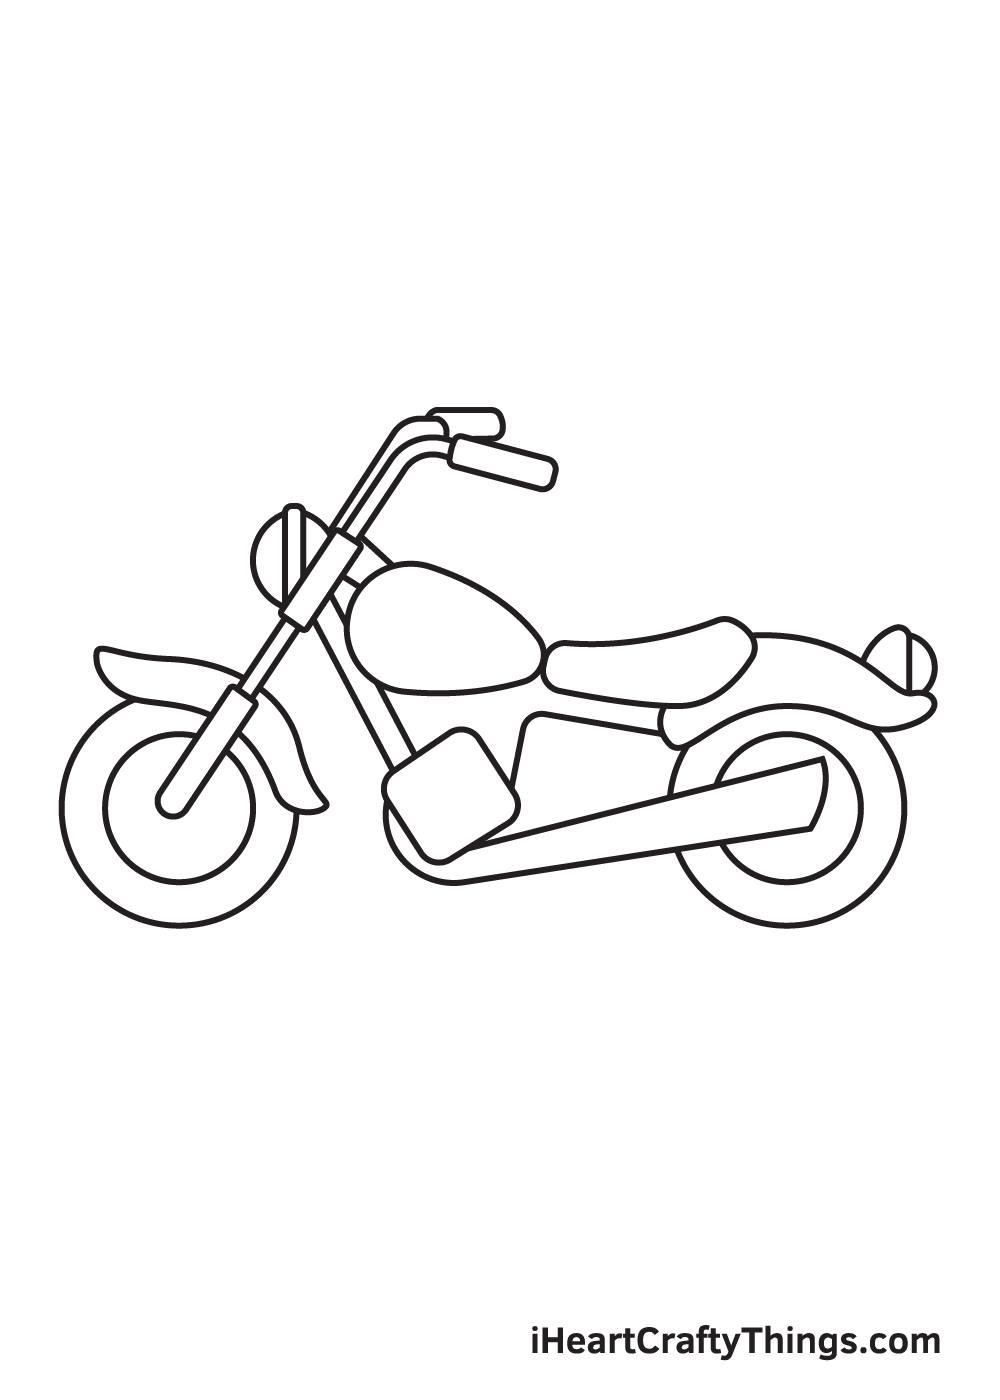 Motorcycle Drawing - How To Draw A Motorcycle Step By Step